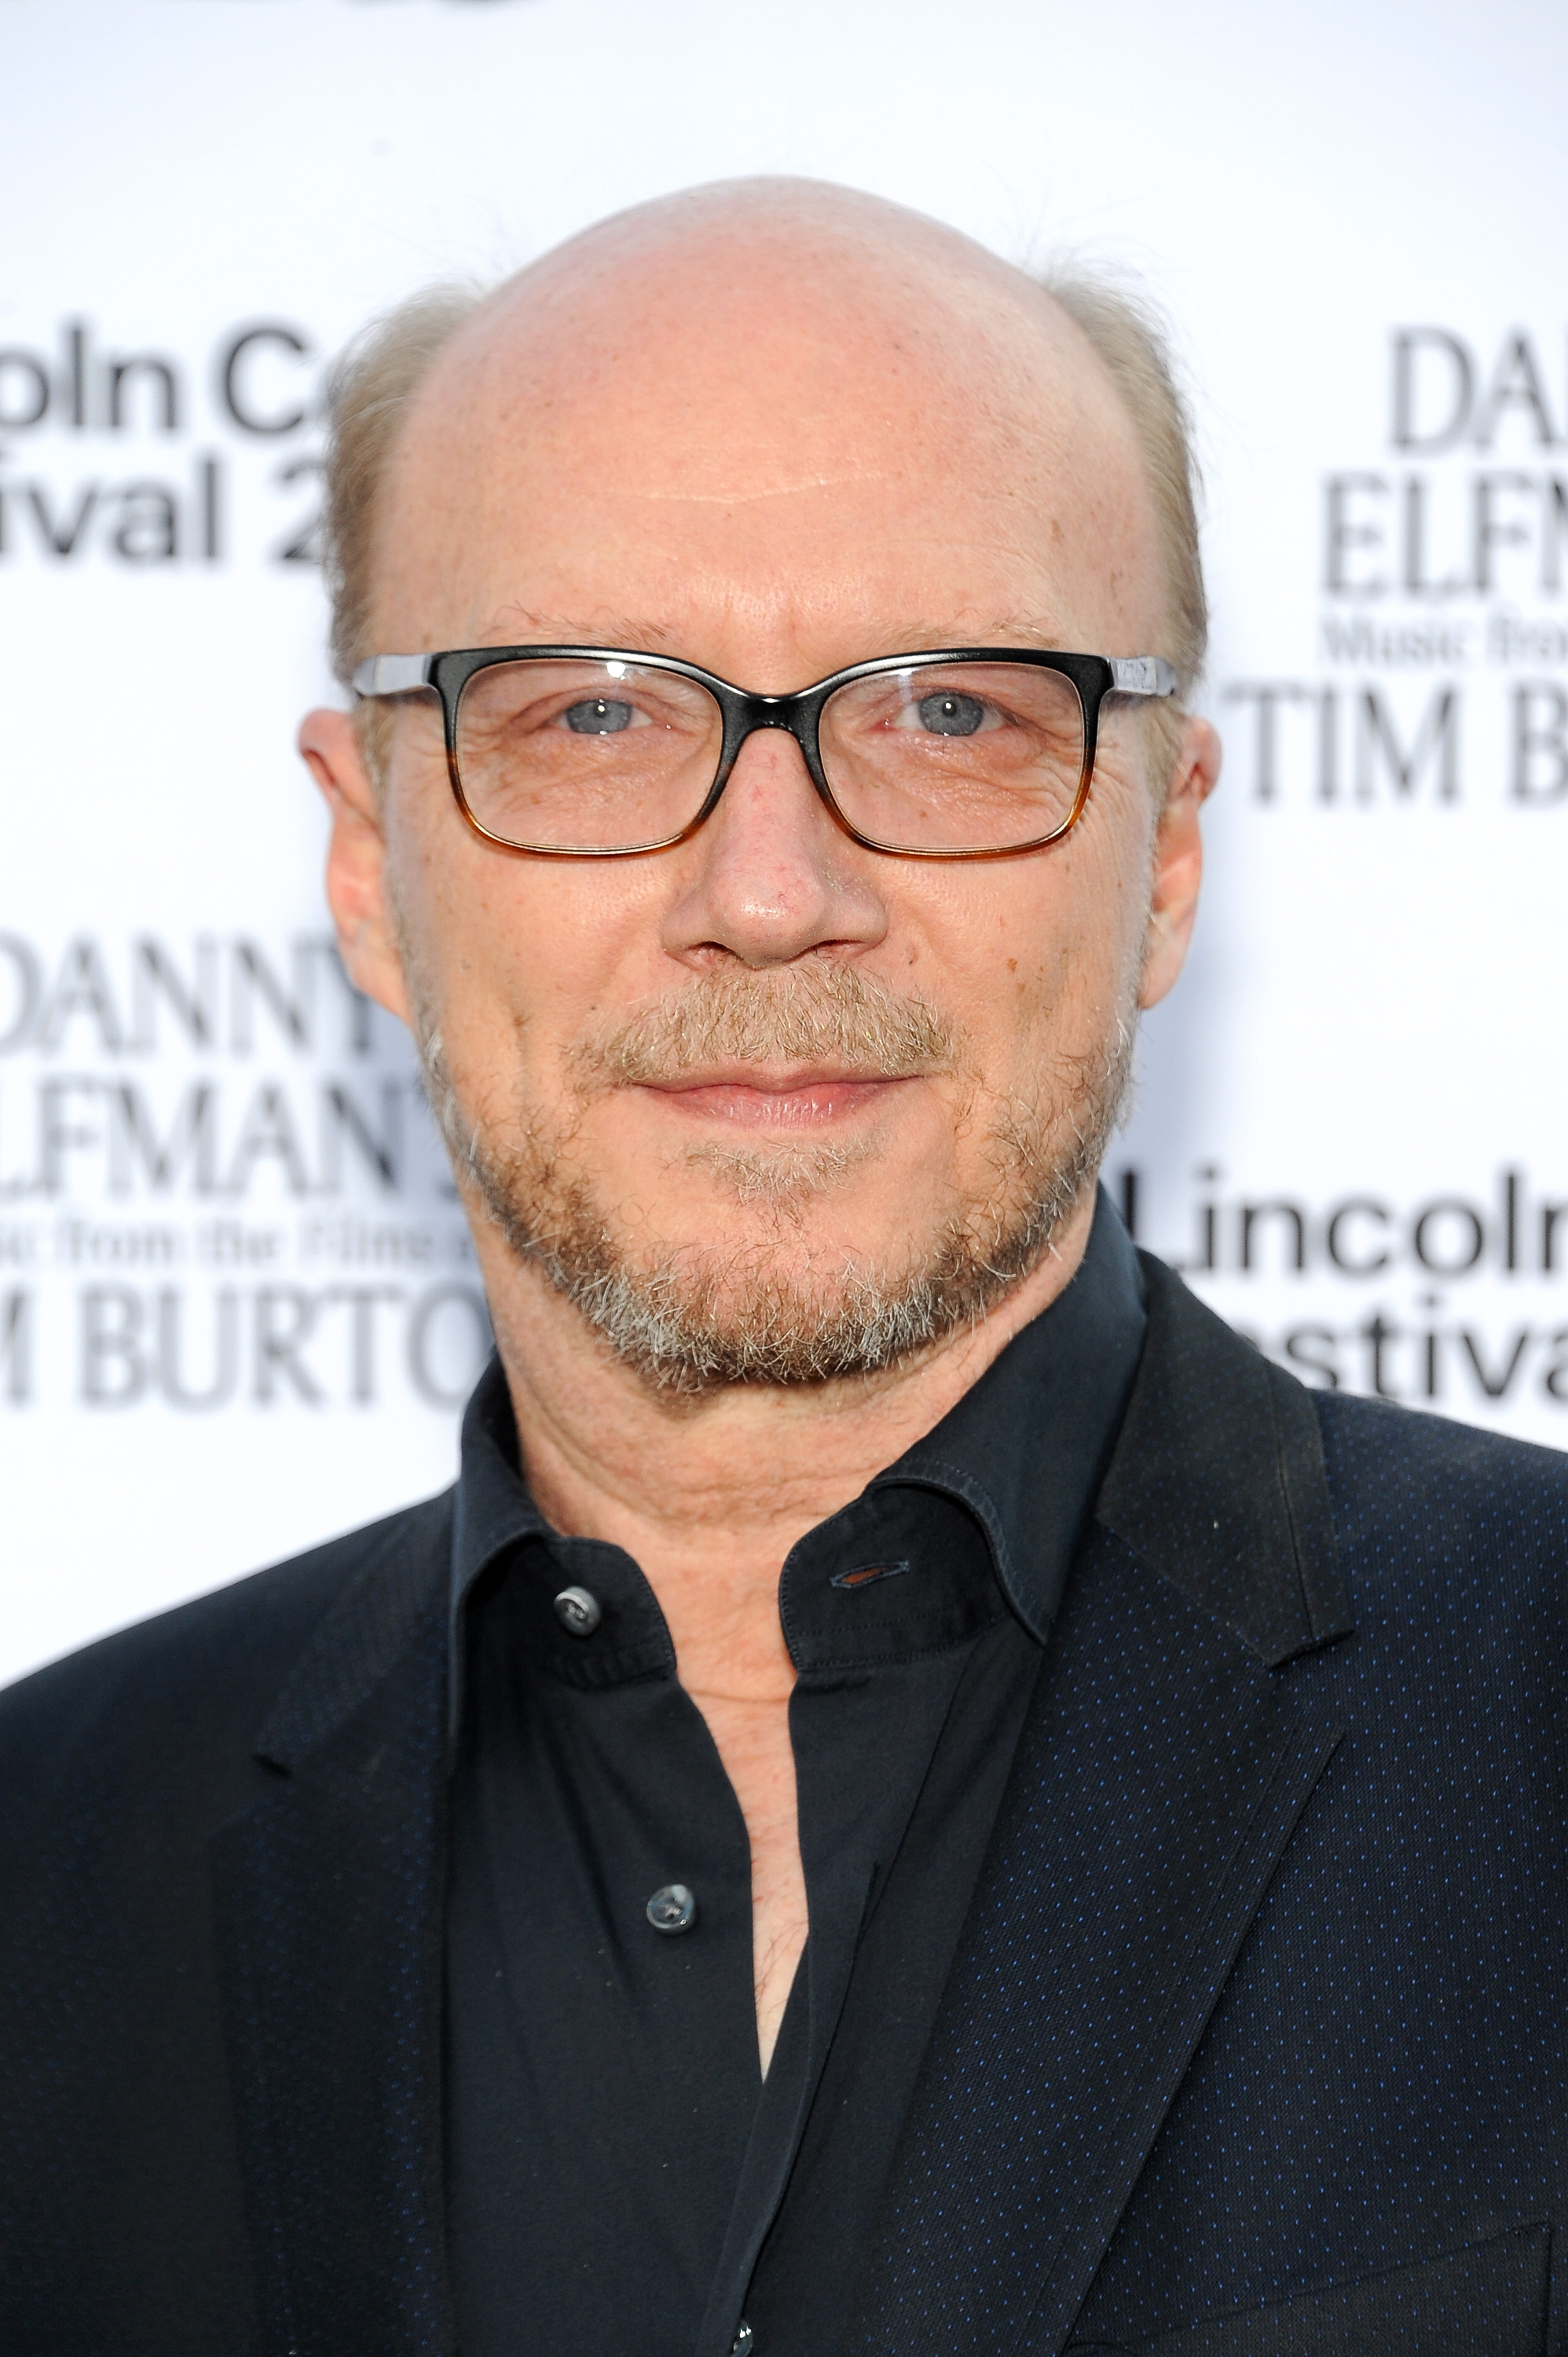 Paul Haggis attends the opening night of "Danny Elfman's Music from the Films of Tim Burton" at Lincoln Center on July 6, 2015 in New York City.